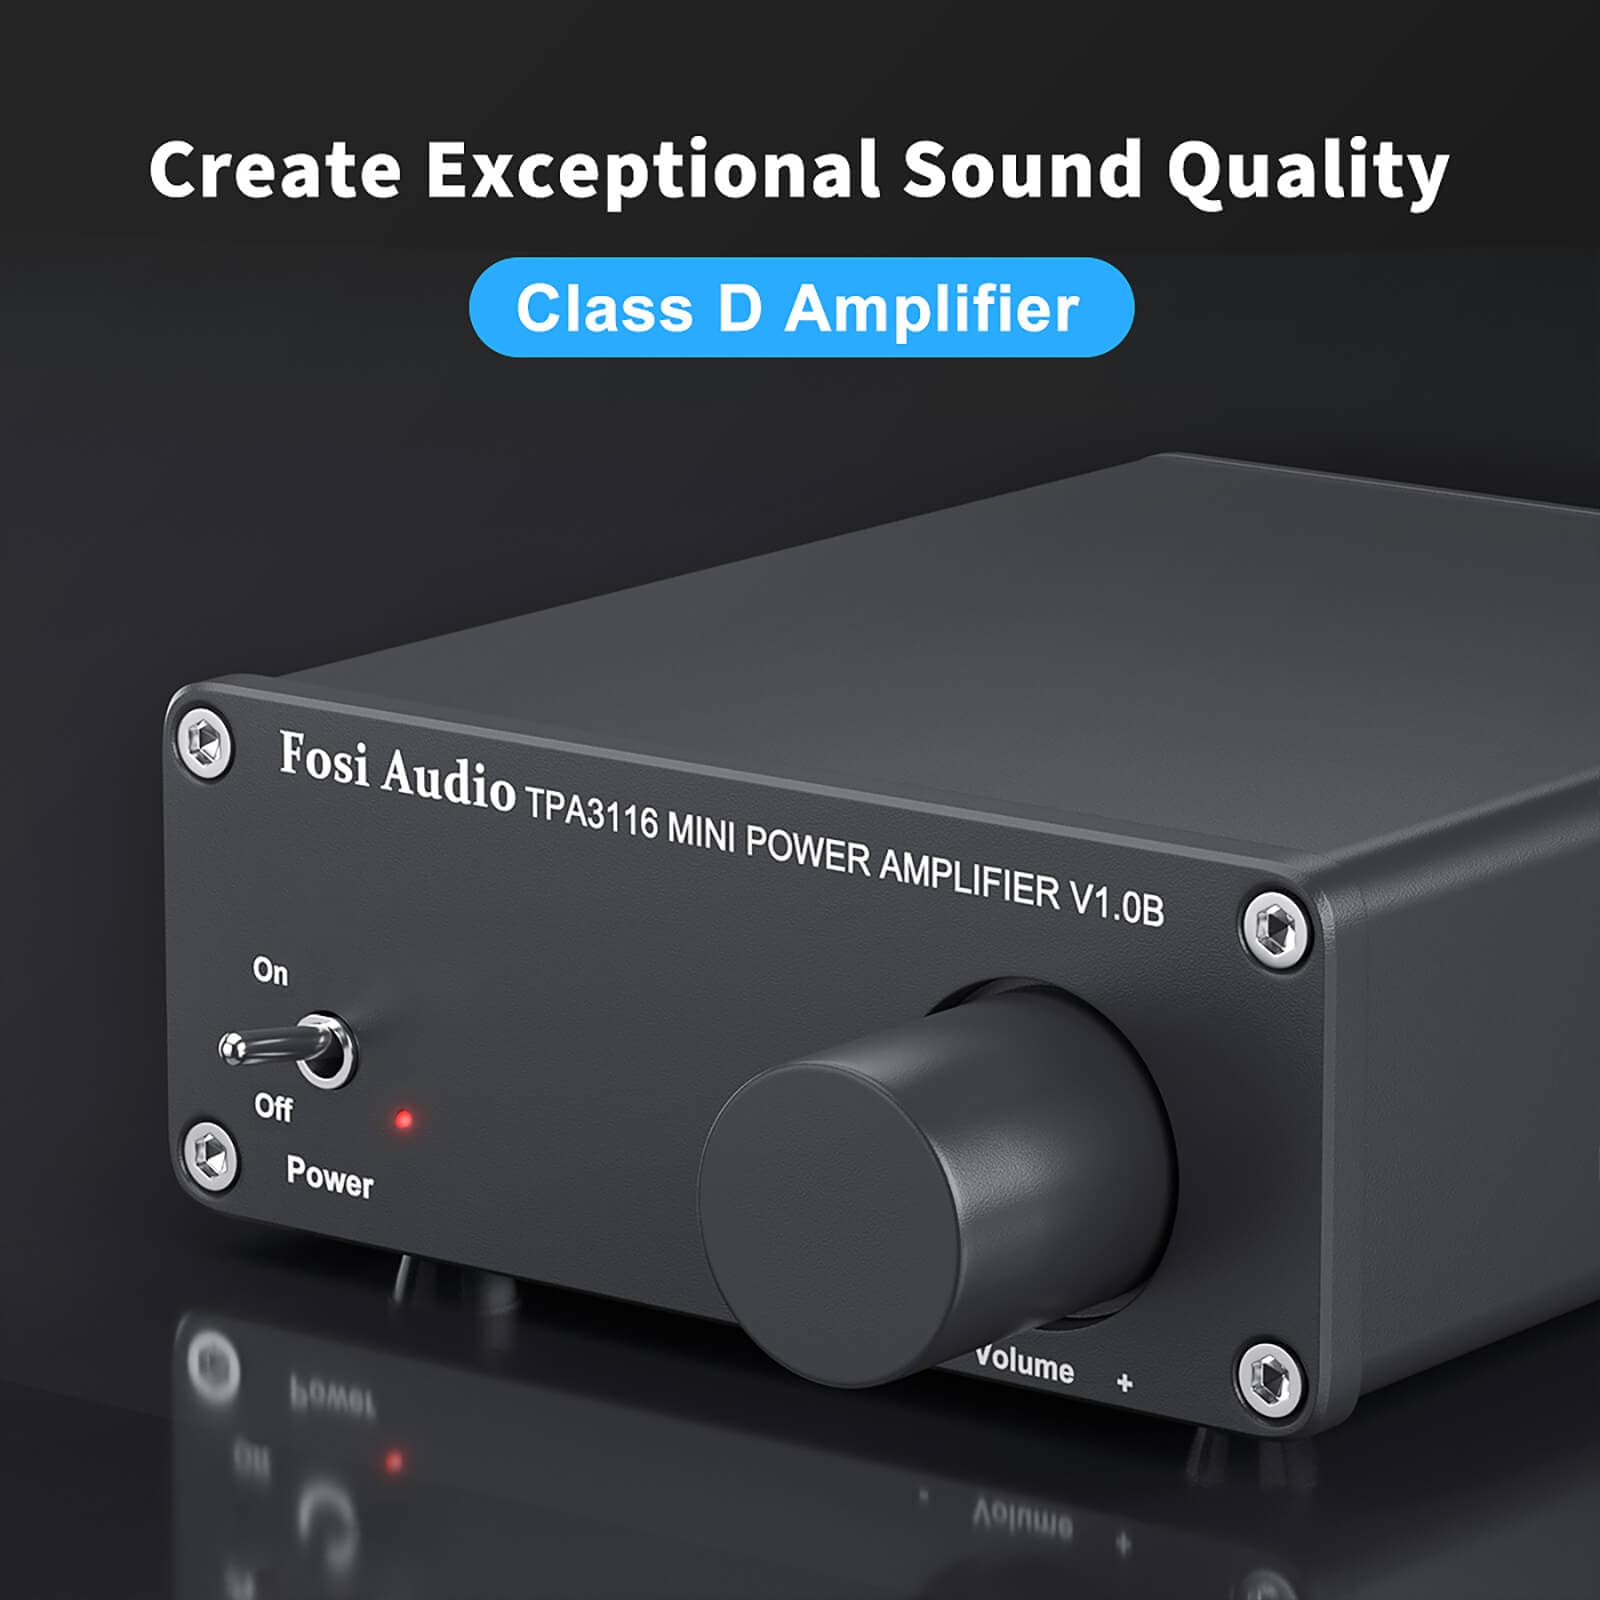 Fosi Audio V1.0B Power Amplifier 2 Channel Stereo Audio Mini Hi-Fi Class D Integrated TPA3116 Amp for Home Passive Speakers 50W x 2